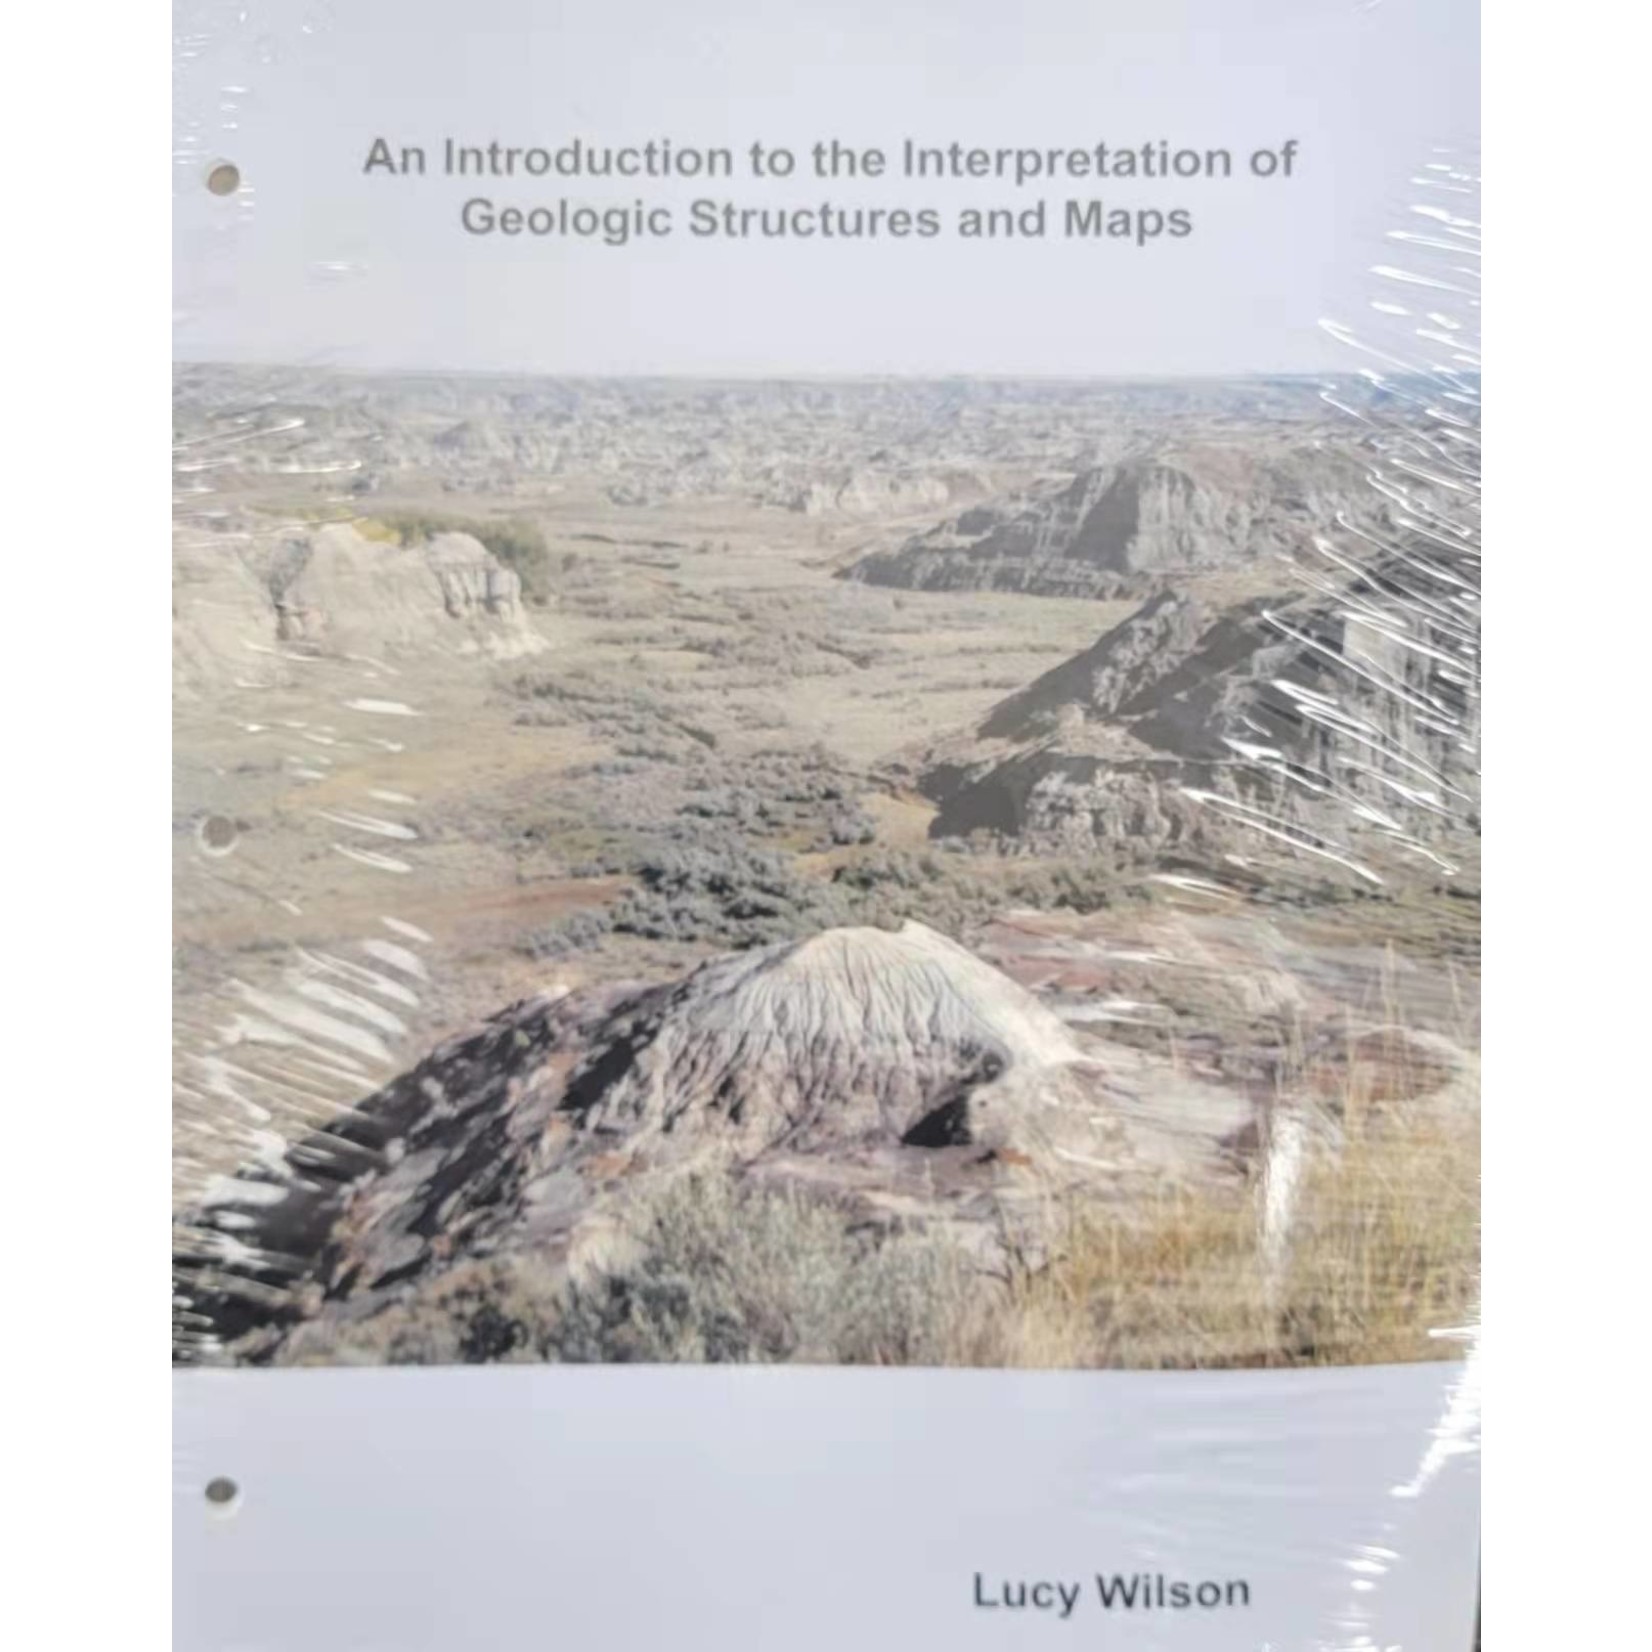 An Introduction to the Interpretation of Geologic Structures and Maps